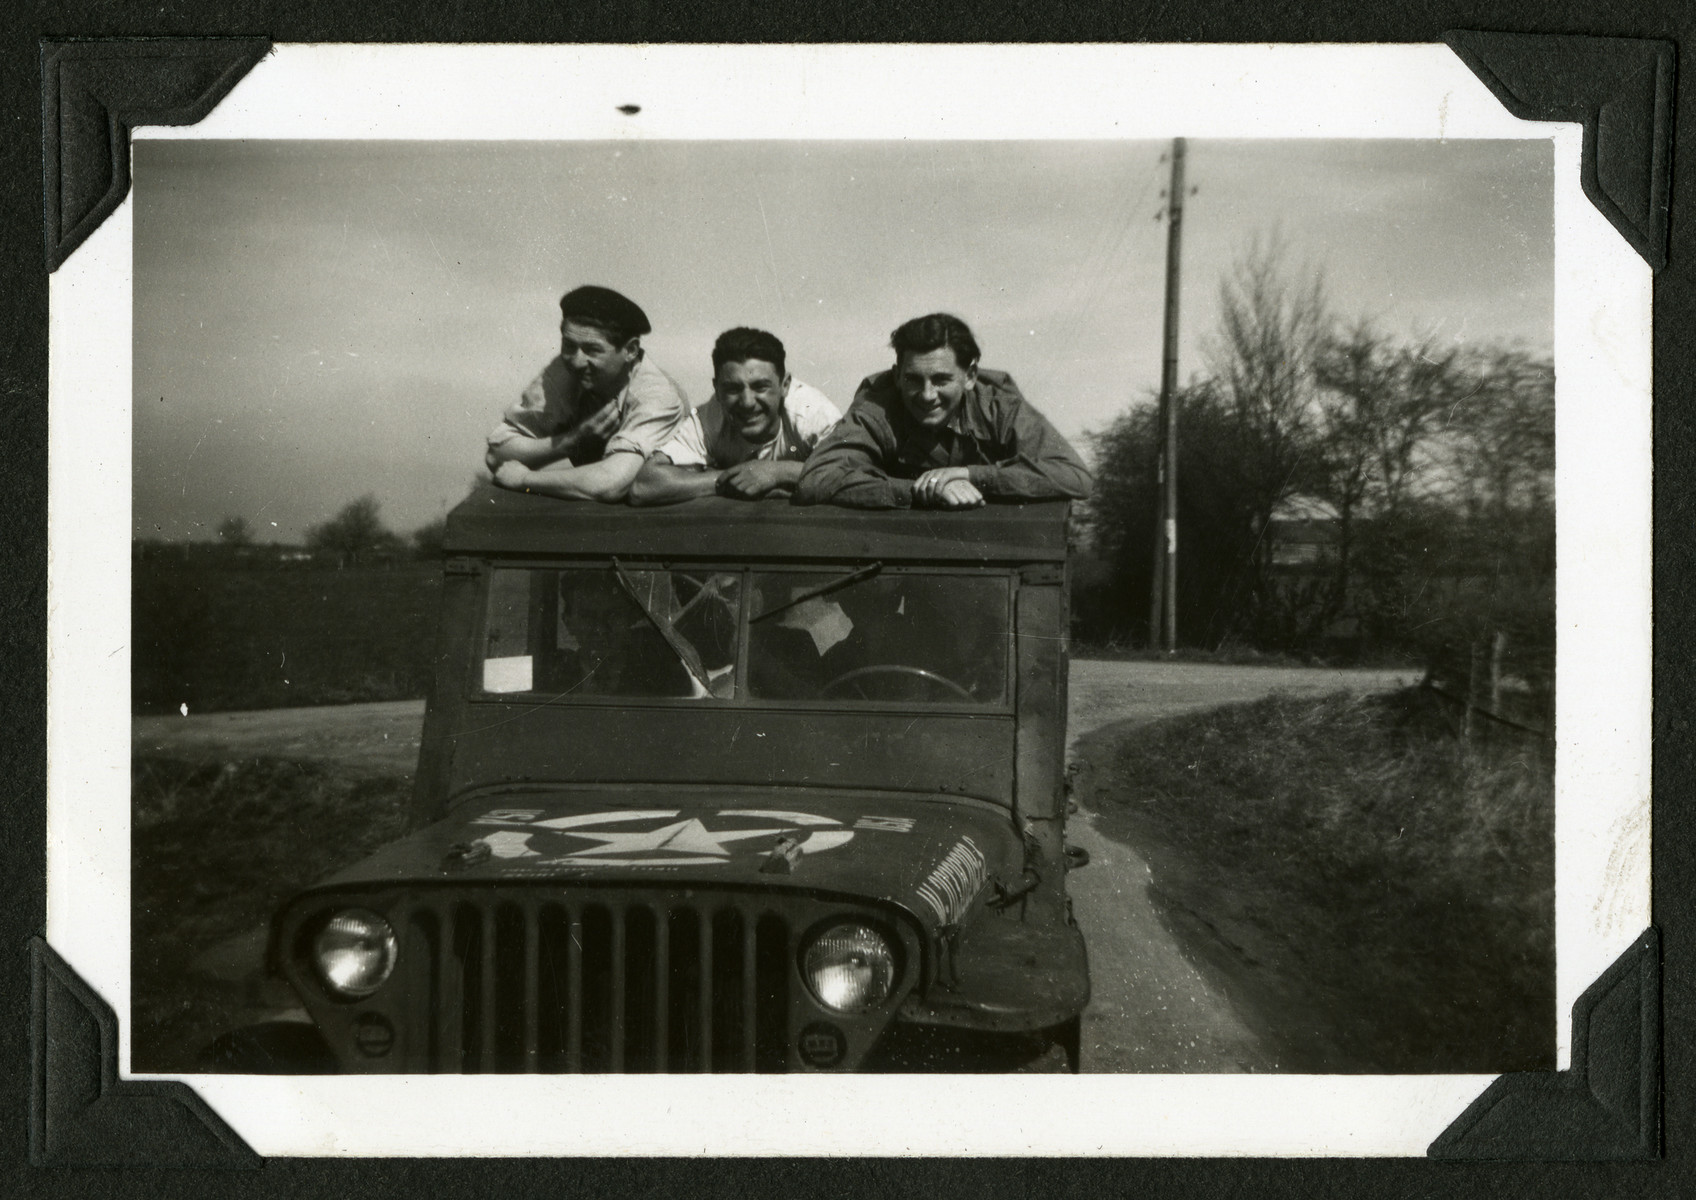 Three members of a hachshara in Leve, Belgium lean against the roof of a jeep.